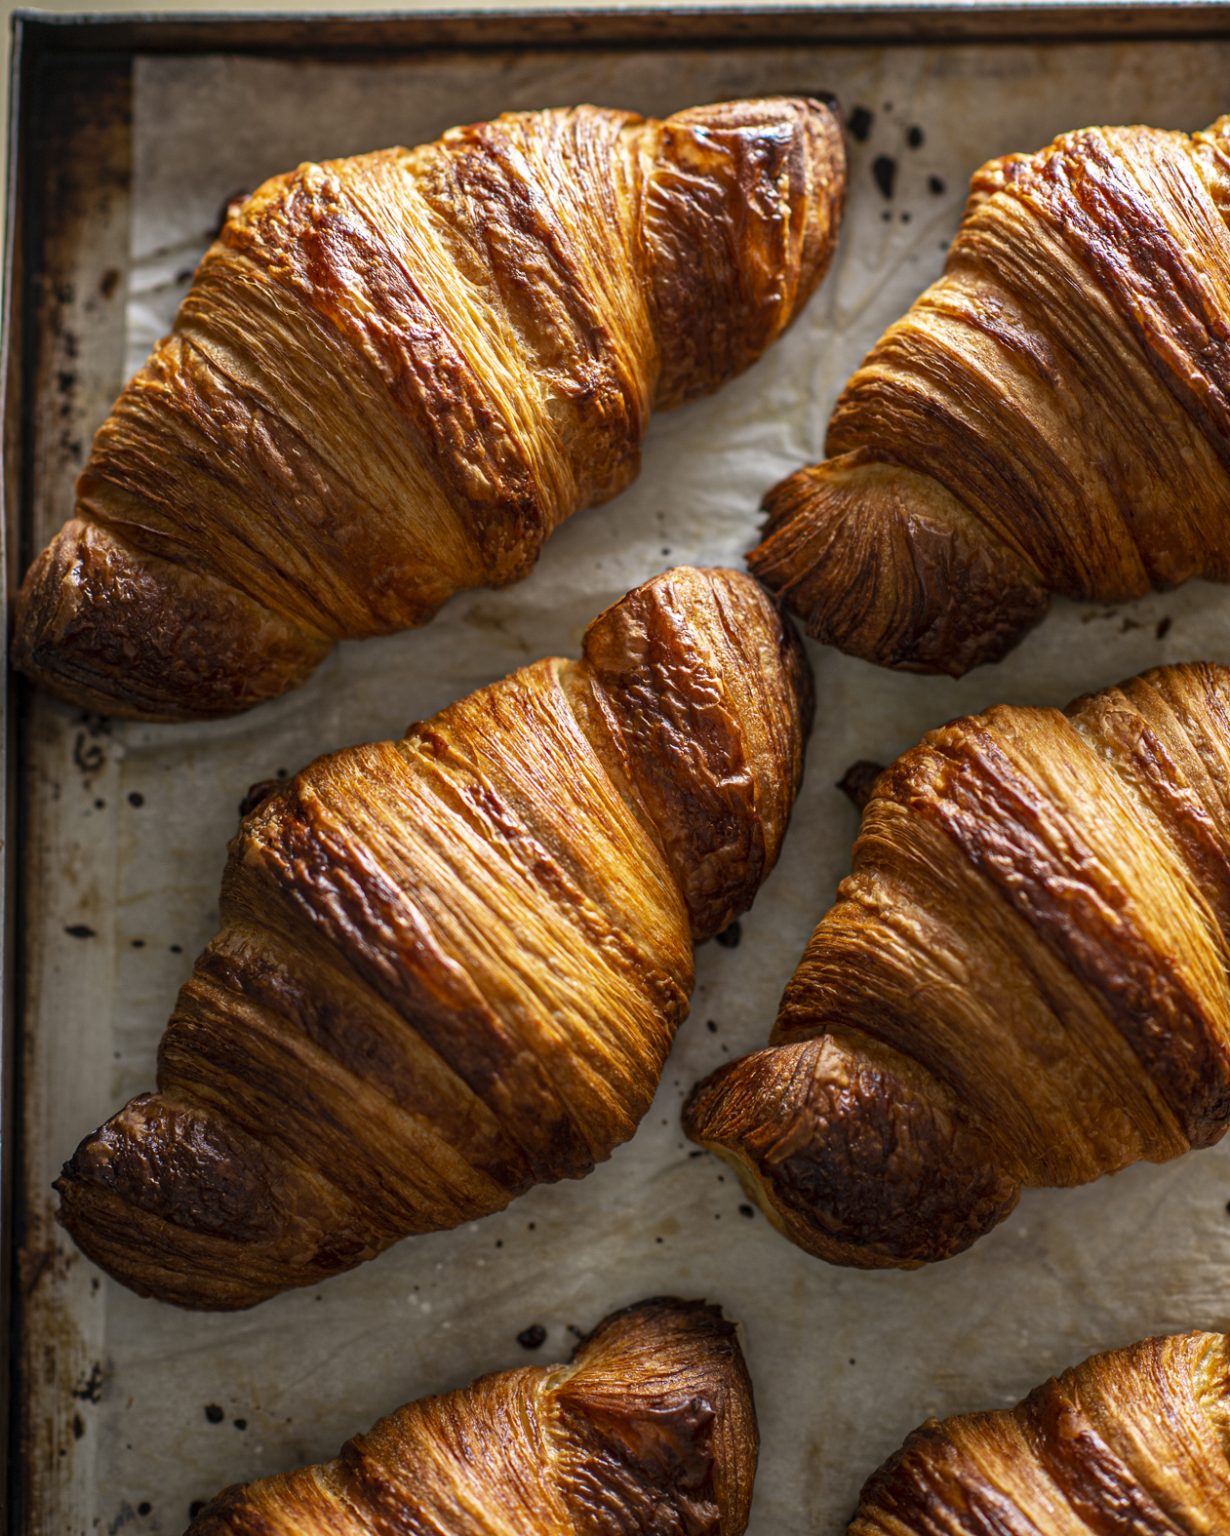 Flaky, golden croissant on a rustic surface, freshly baked and buttery.